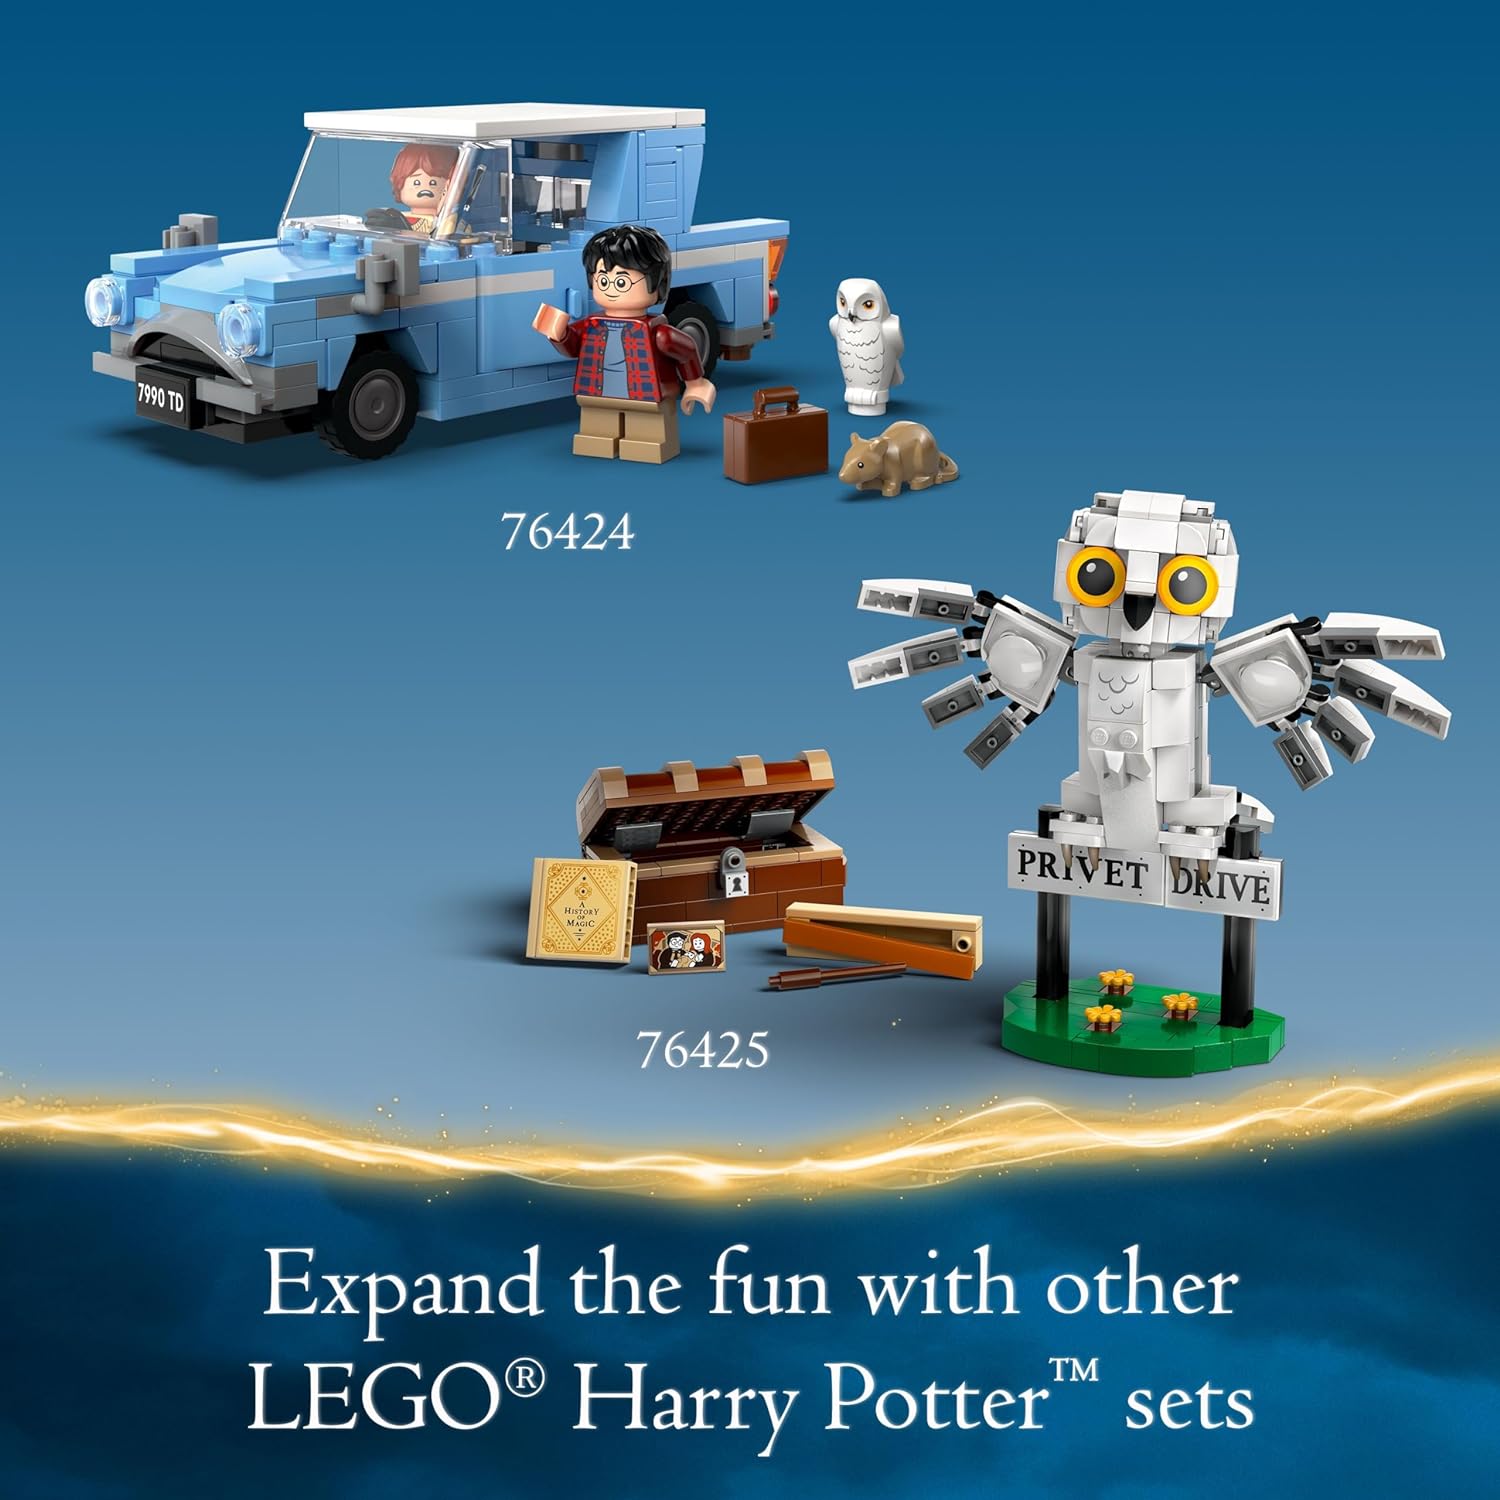 LEGO 76424 Harry Potter Flying Ford Anglia, Buildable Car Toy with 2 Minifigures for Role Play, Fantasy Playset for Kids, Harry Potter Car.